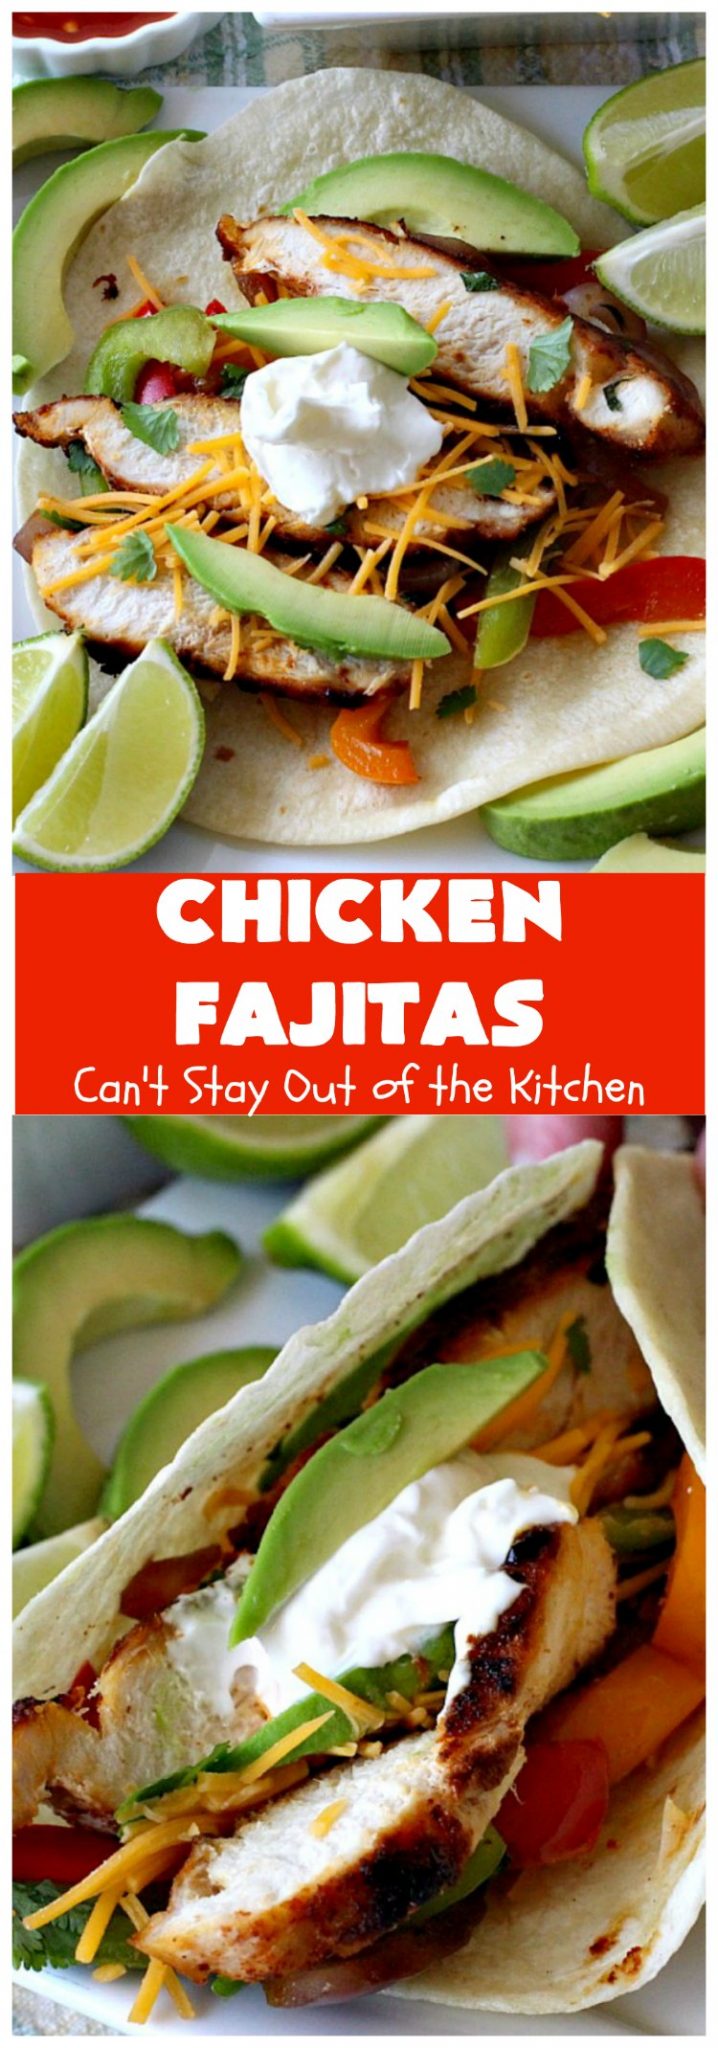 Chicken Fajitas – Can't Stay Out of the Kitchen